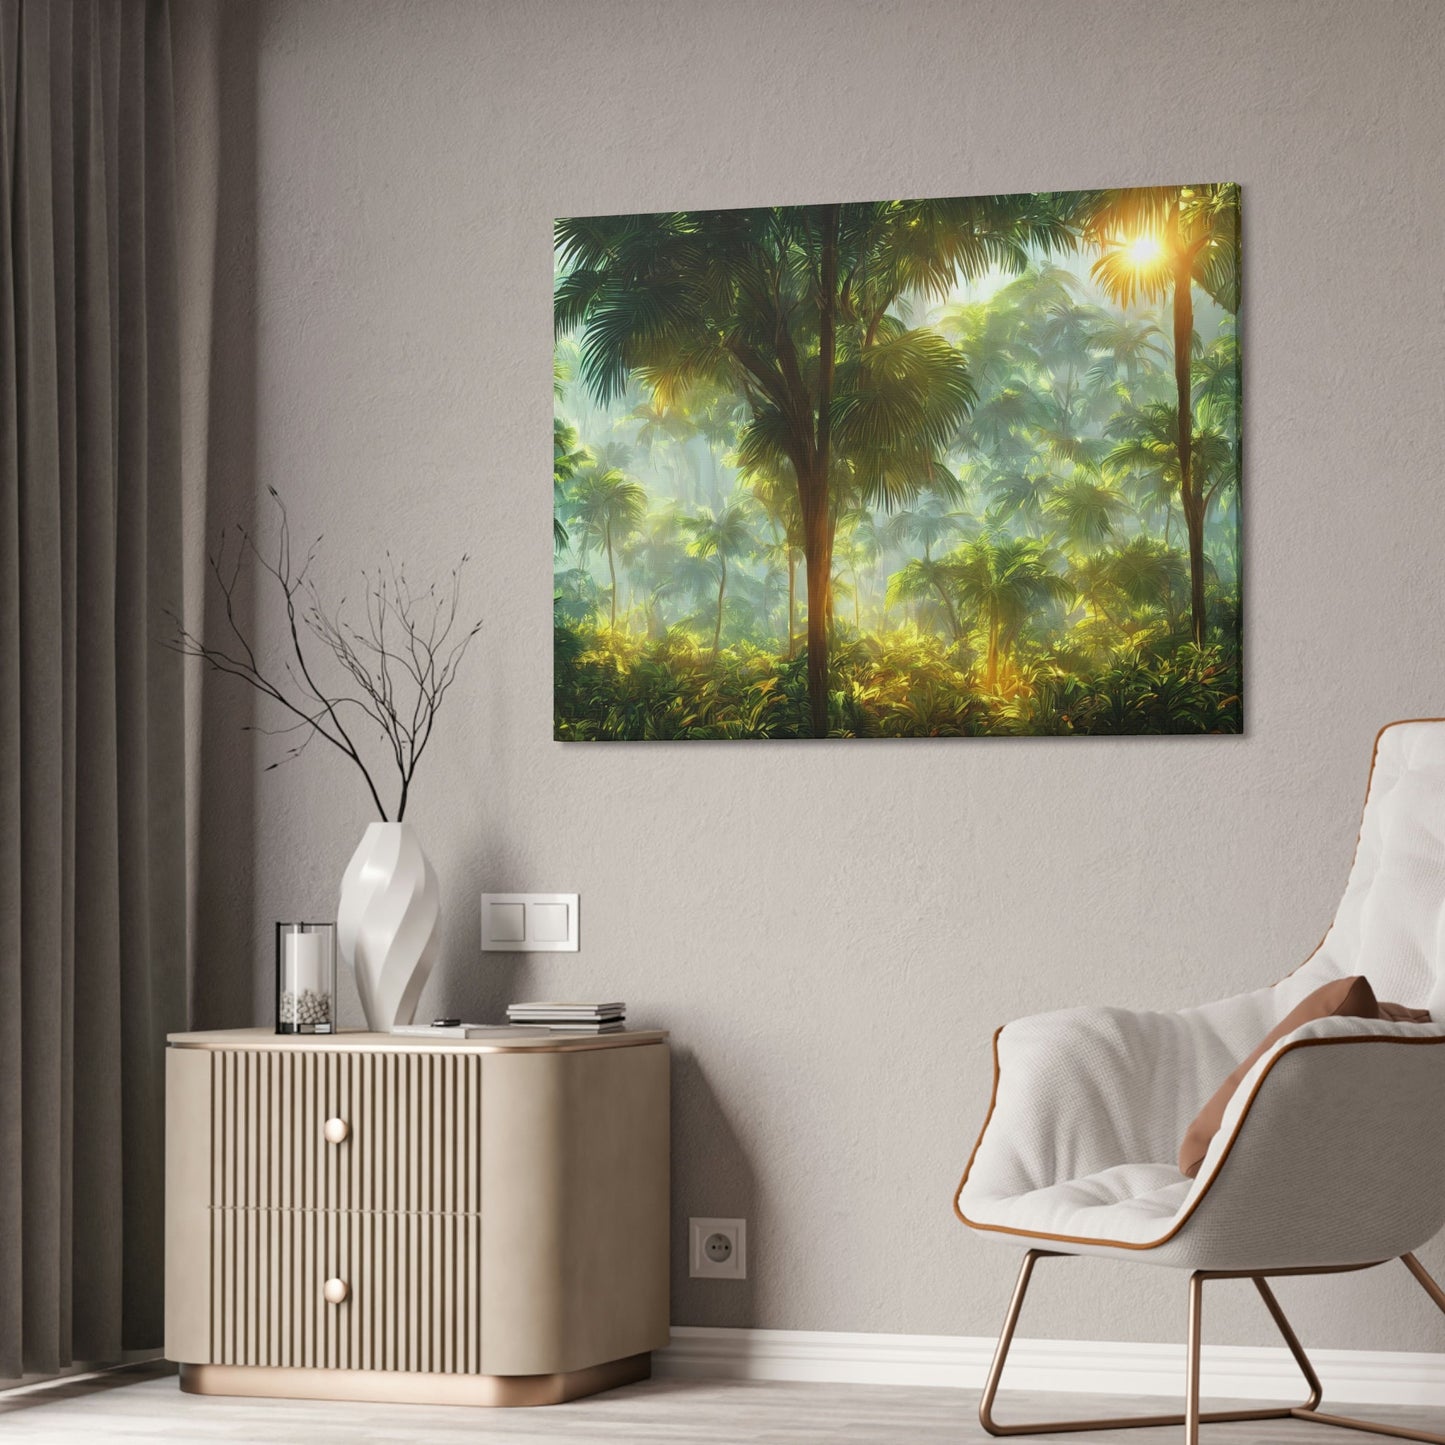 Island Vibes: Capturing the Essence of the Tropics on Canvas